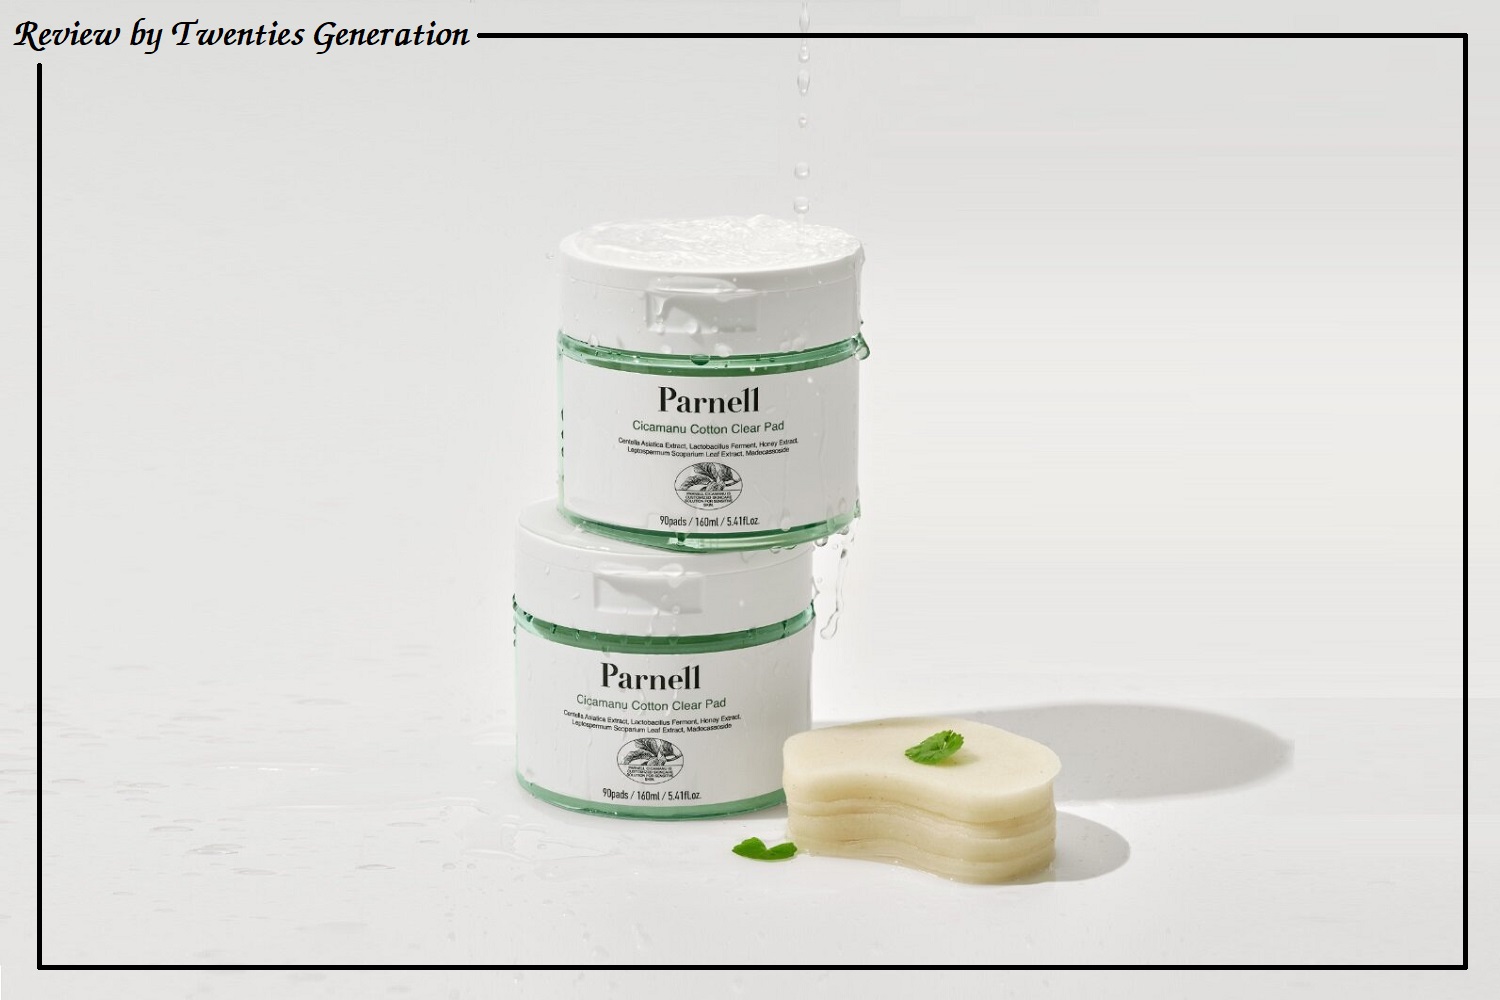 Parnell Cicamanu Cotton Clear Pad Ingredients